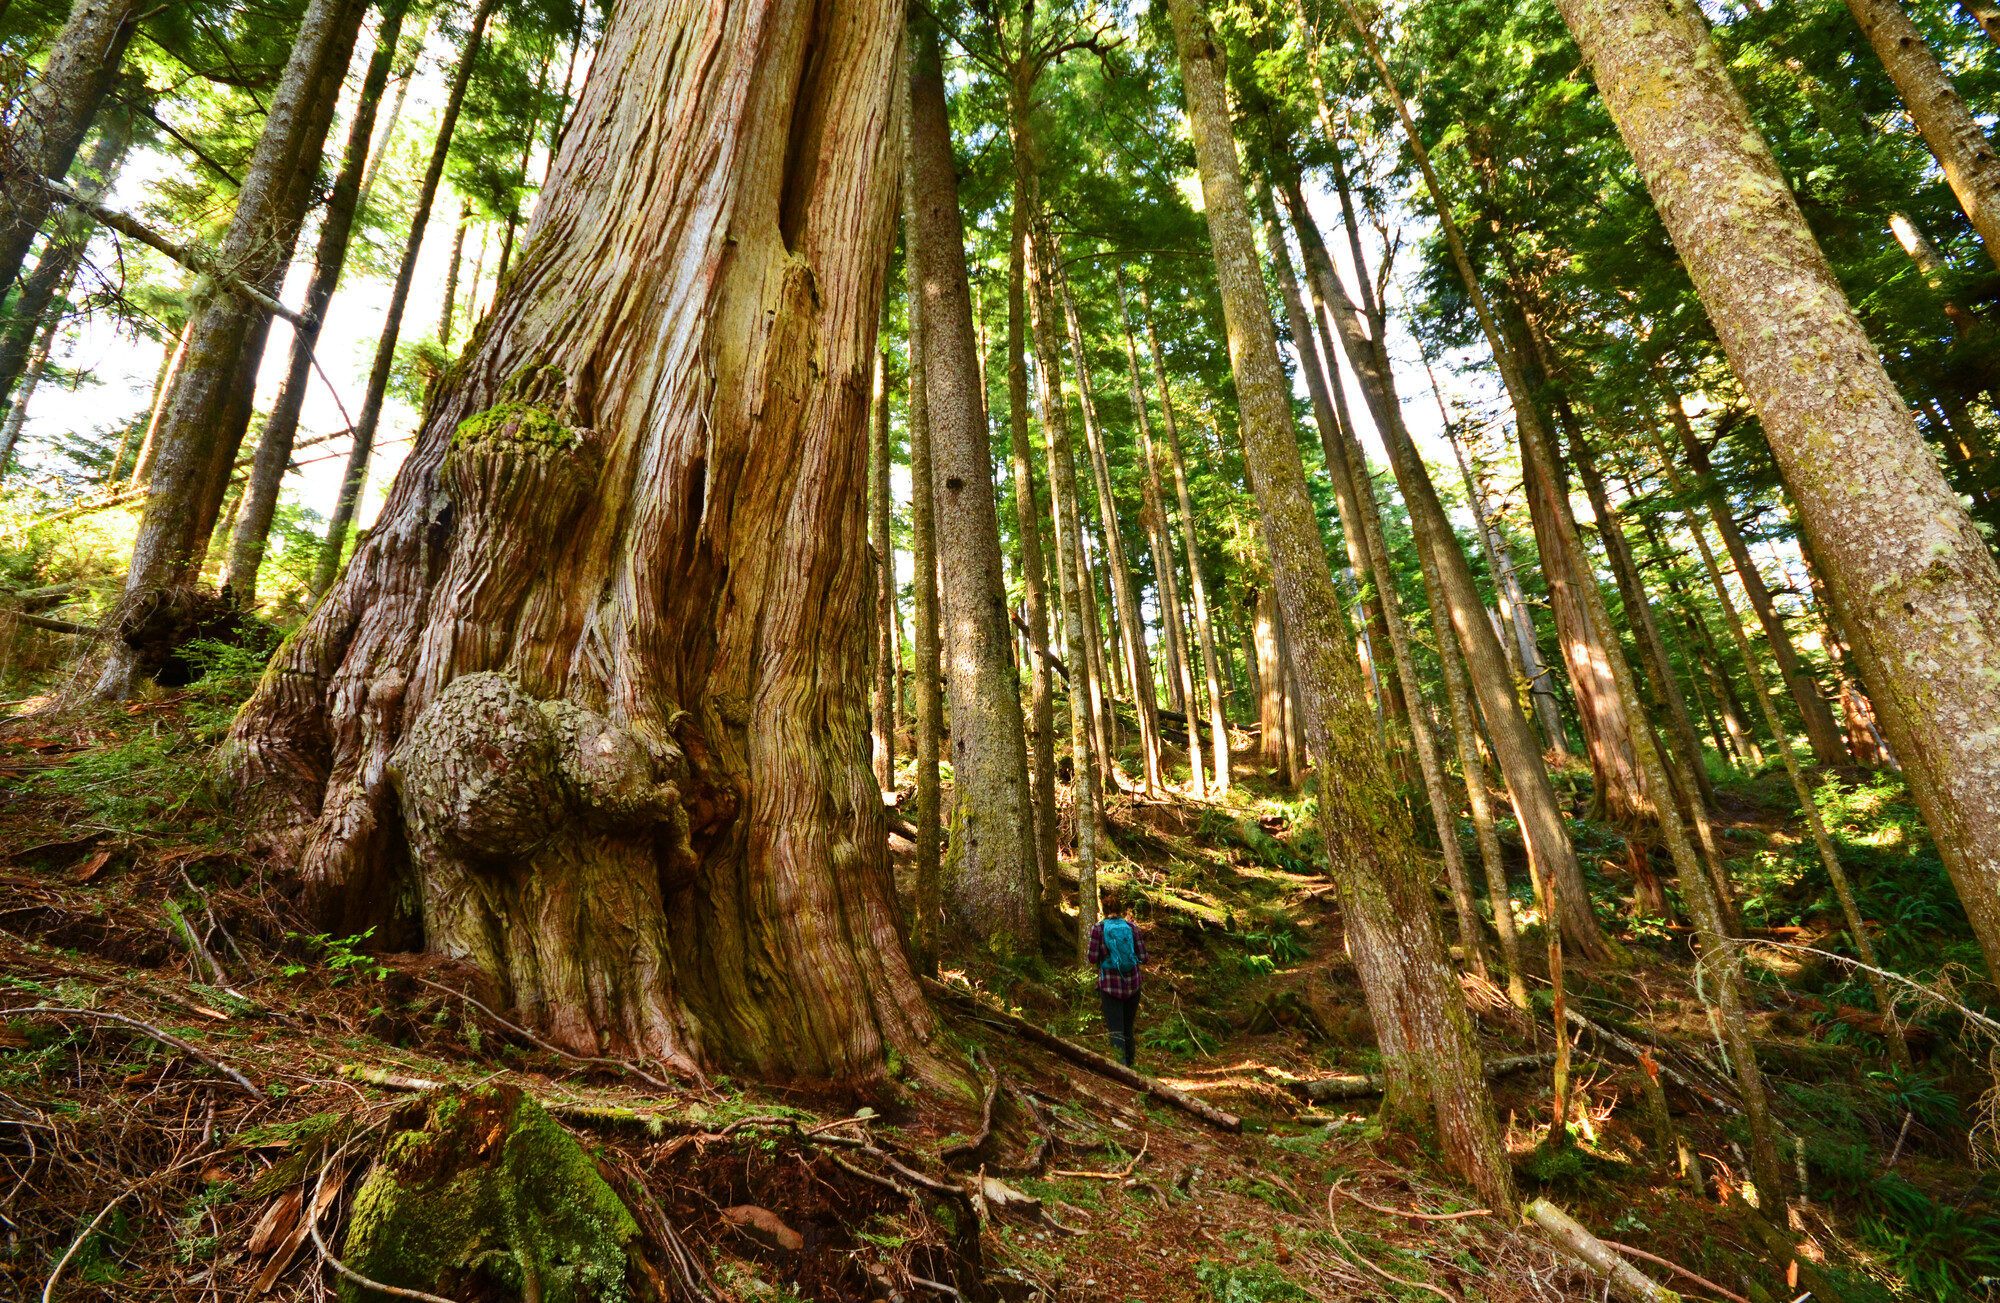 Hiker walking on a forested trail past an old growth Western red cedar (Thuja plicata) tree